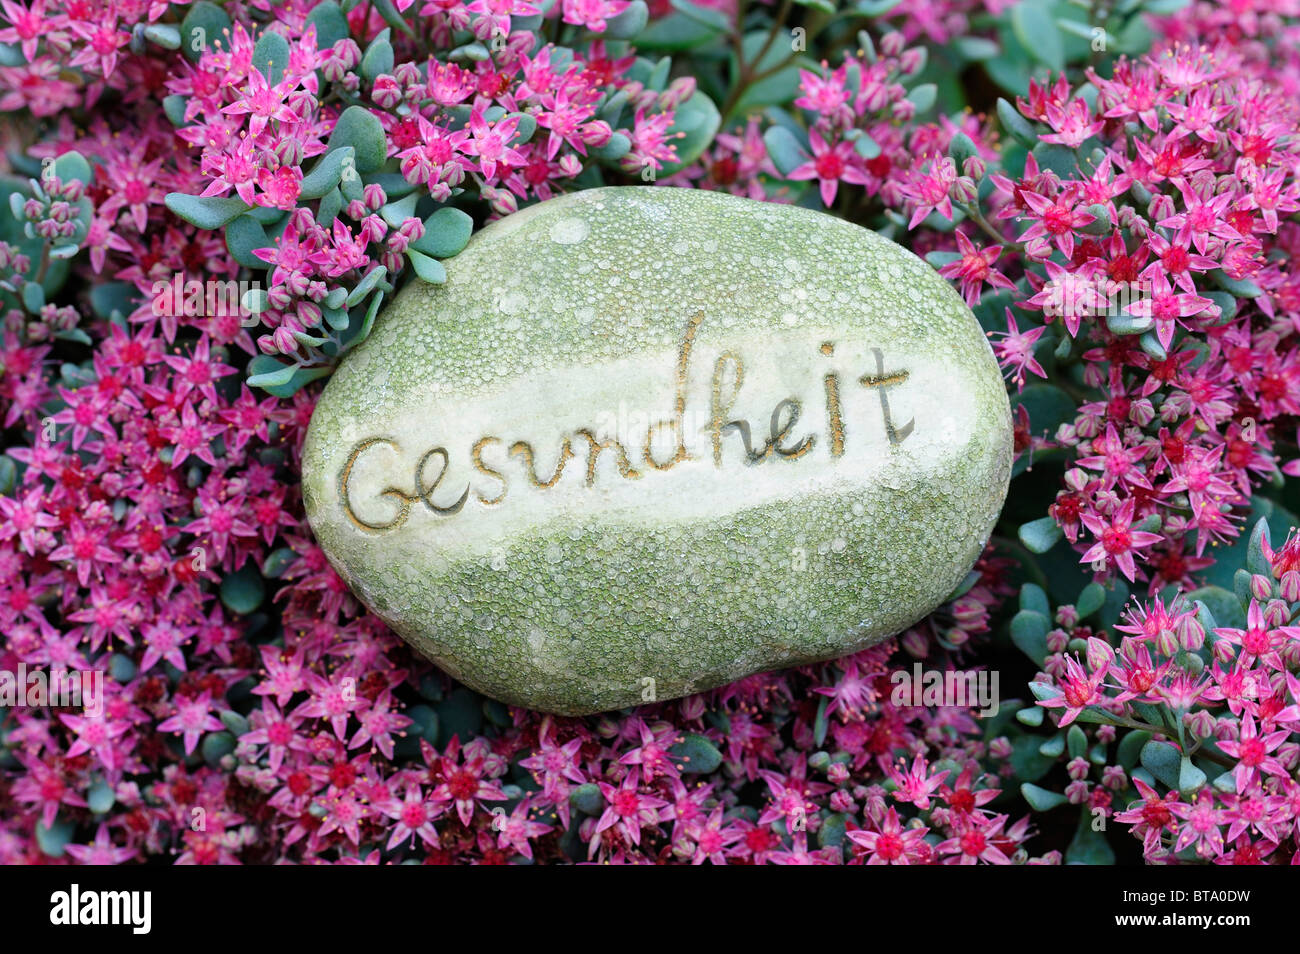 Stone with the word 'Gesundheit', 'health' as a garden decoration in a flower bed Stock Photo